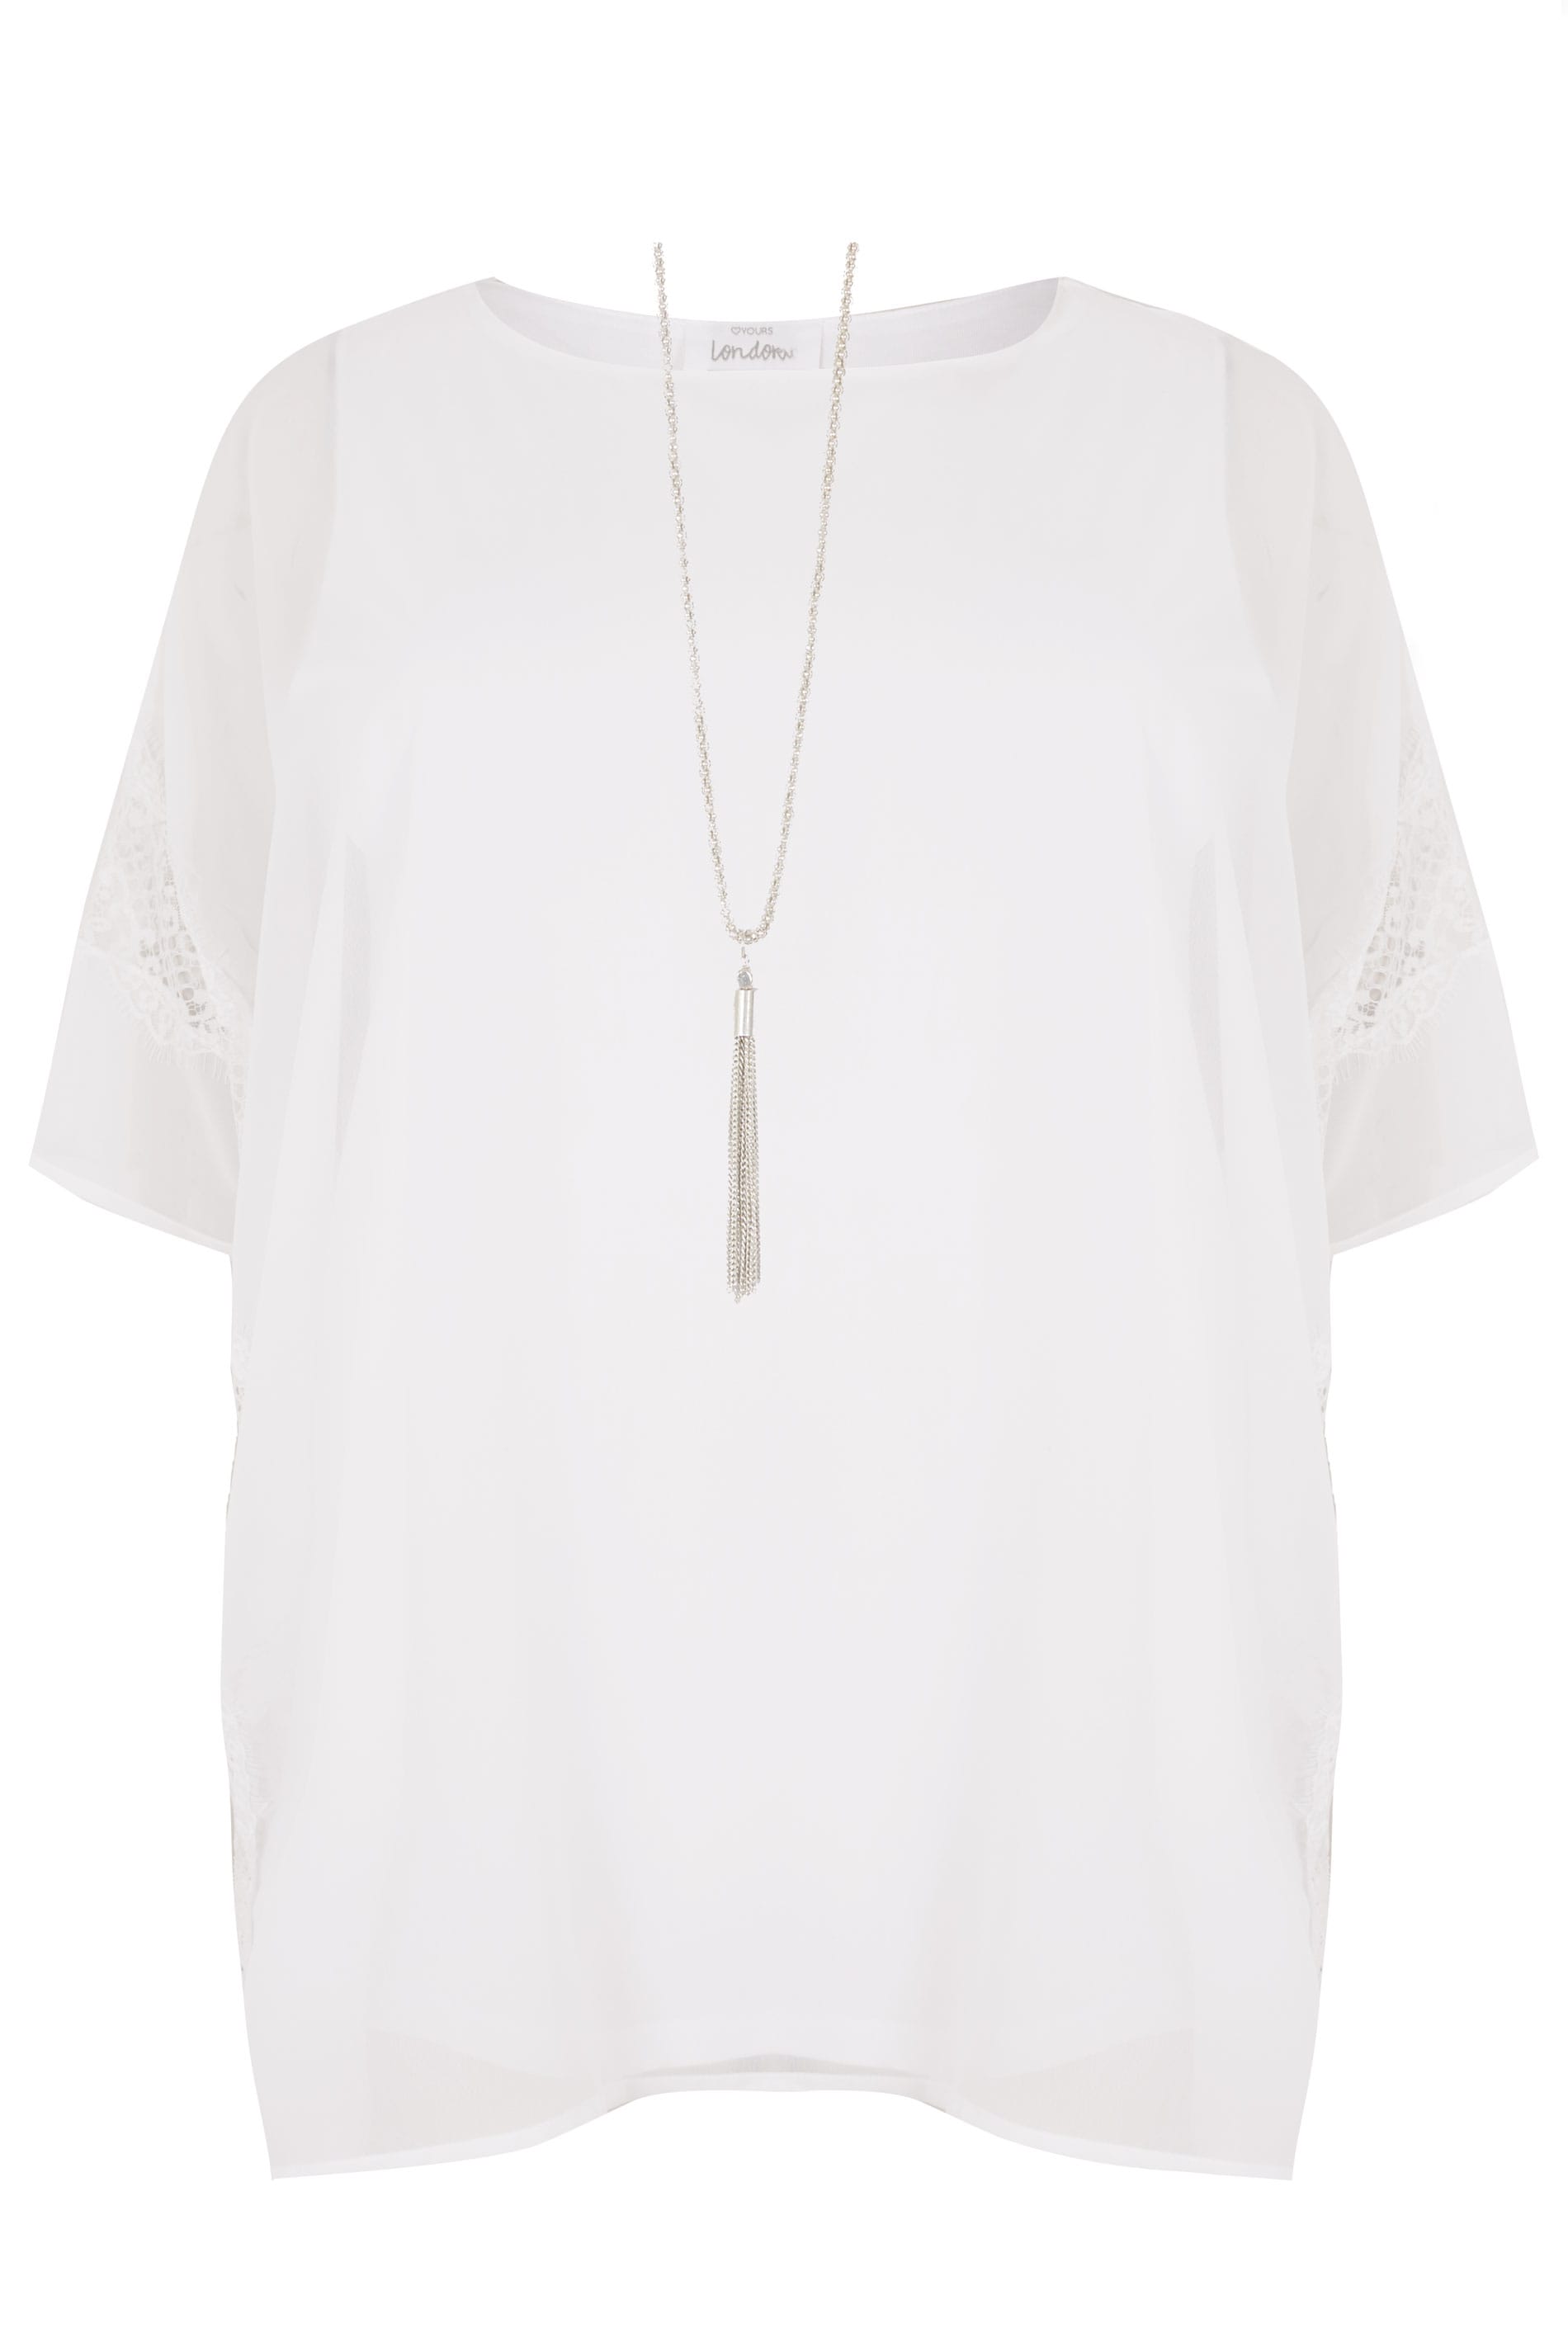 Yours London Witte Chiffon Shirtblouse Inclusief Ketting -3350